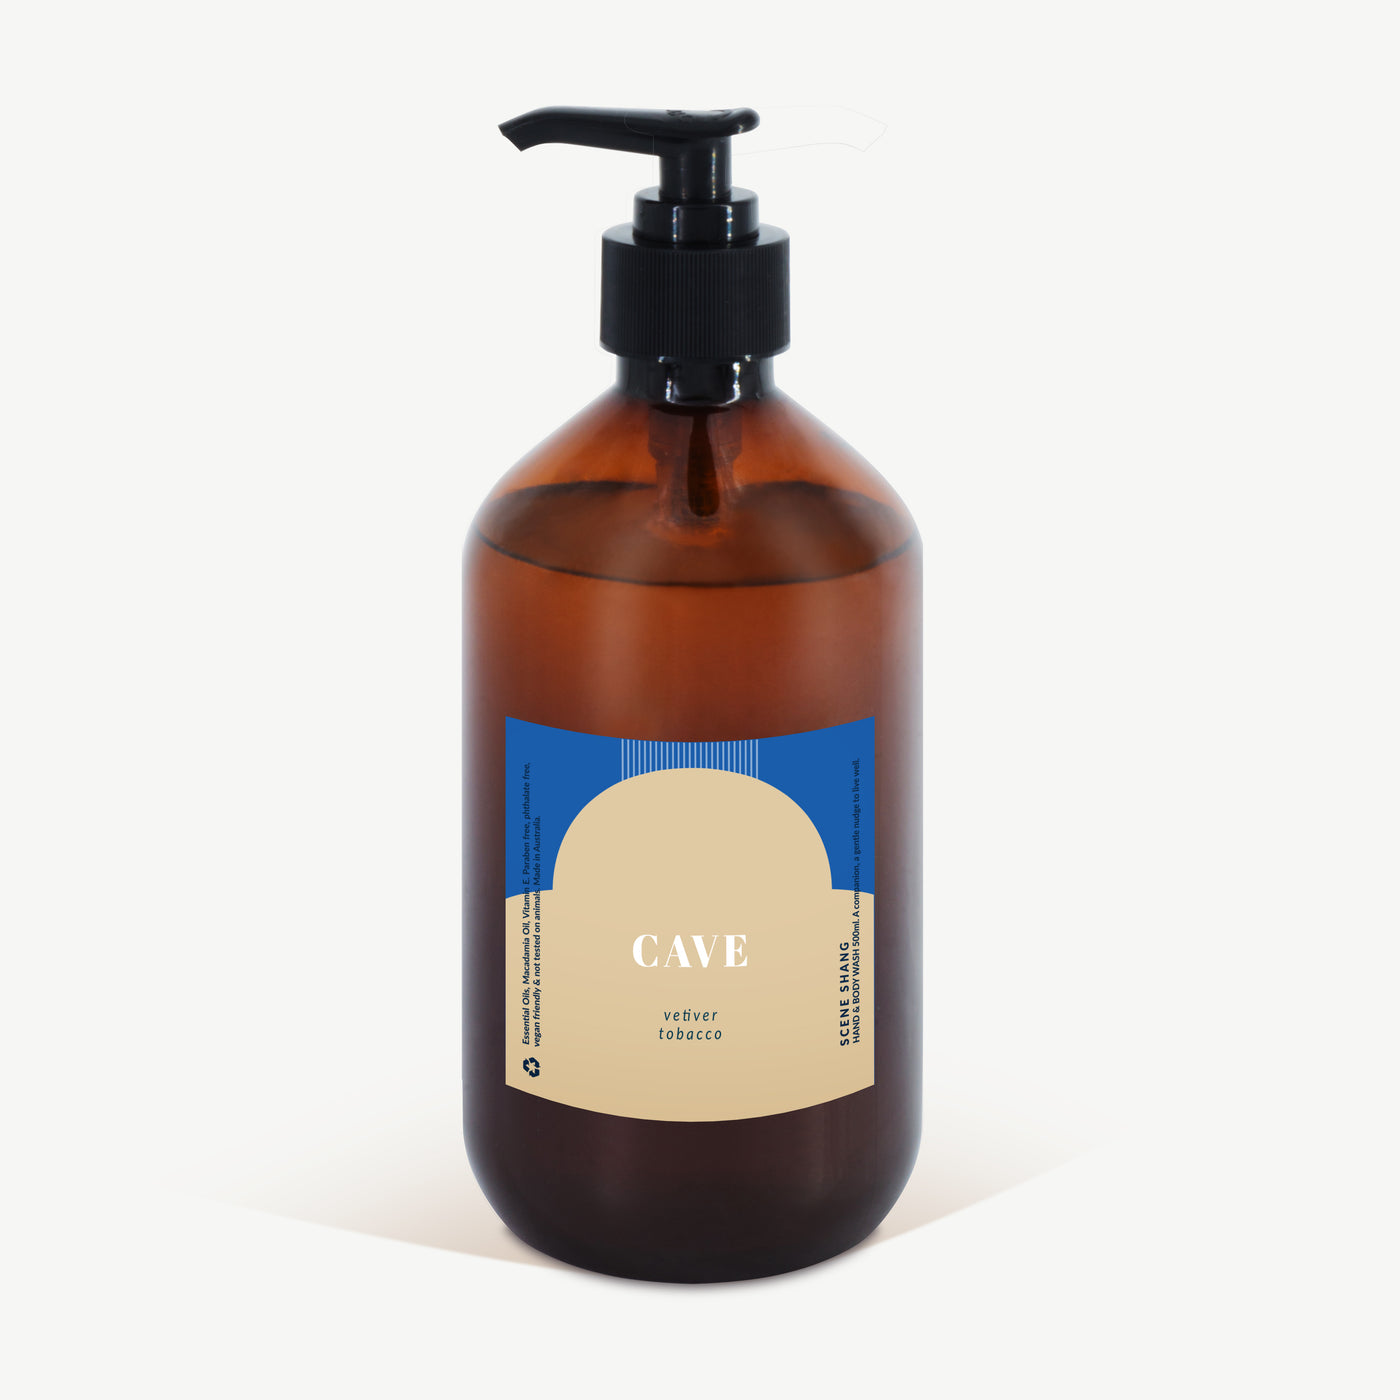 CAVE Hand & Body Wash (Vetiver, Tobacco)